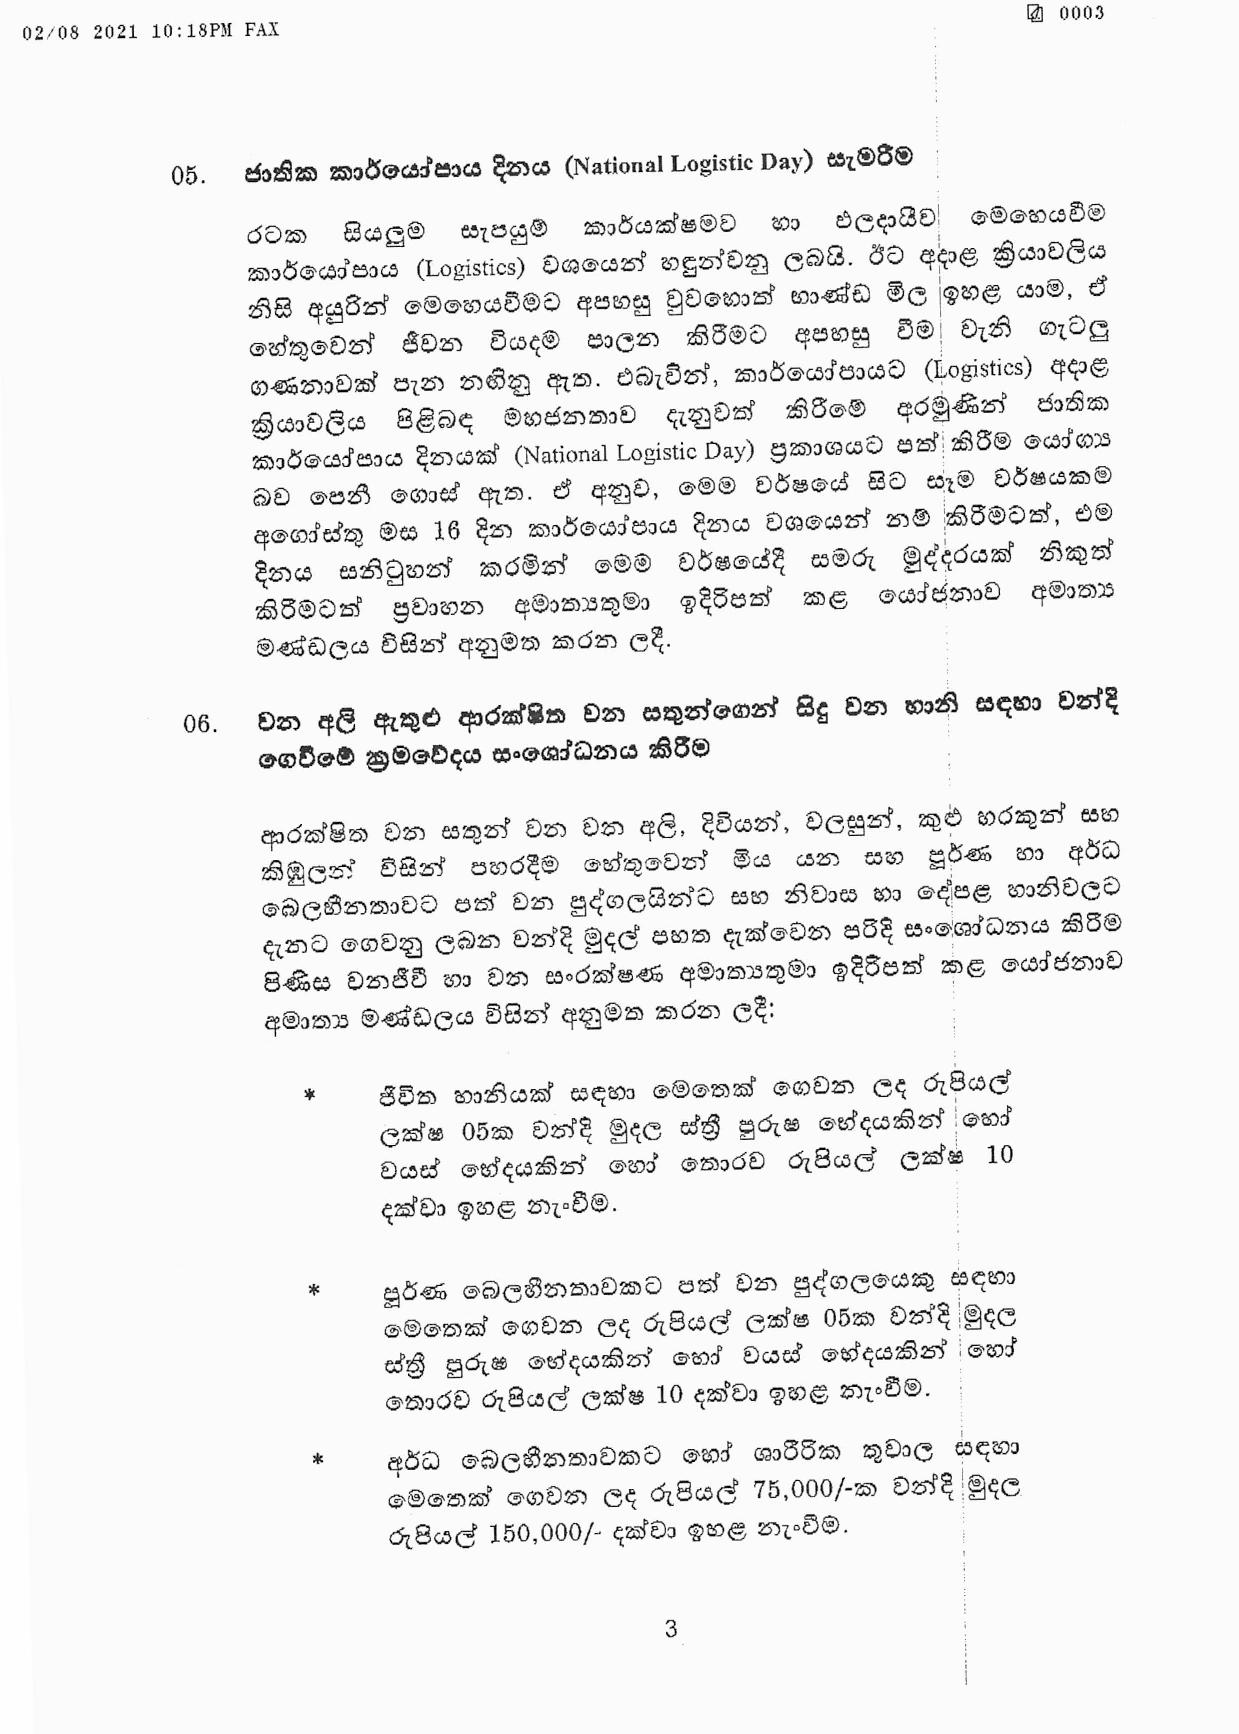 Cabinet Decisions on 02.08.2021 page 003